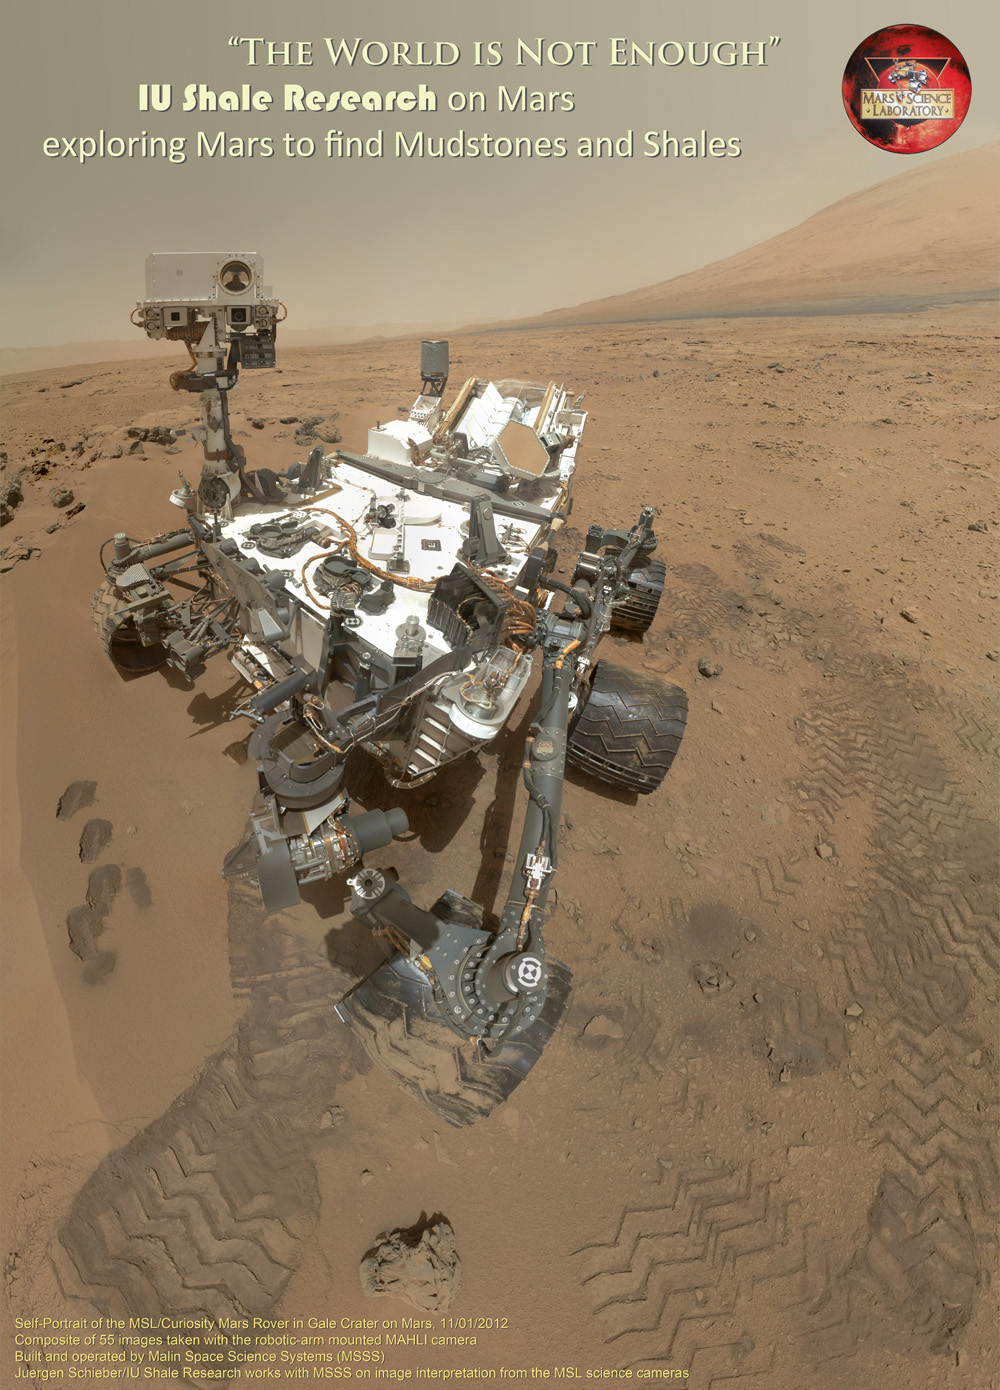 image of Curiosity rover